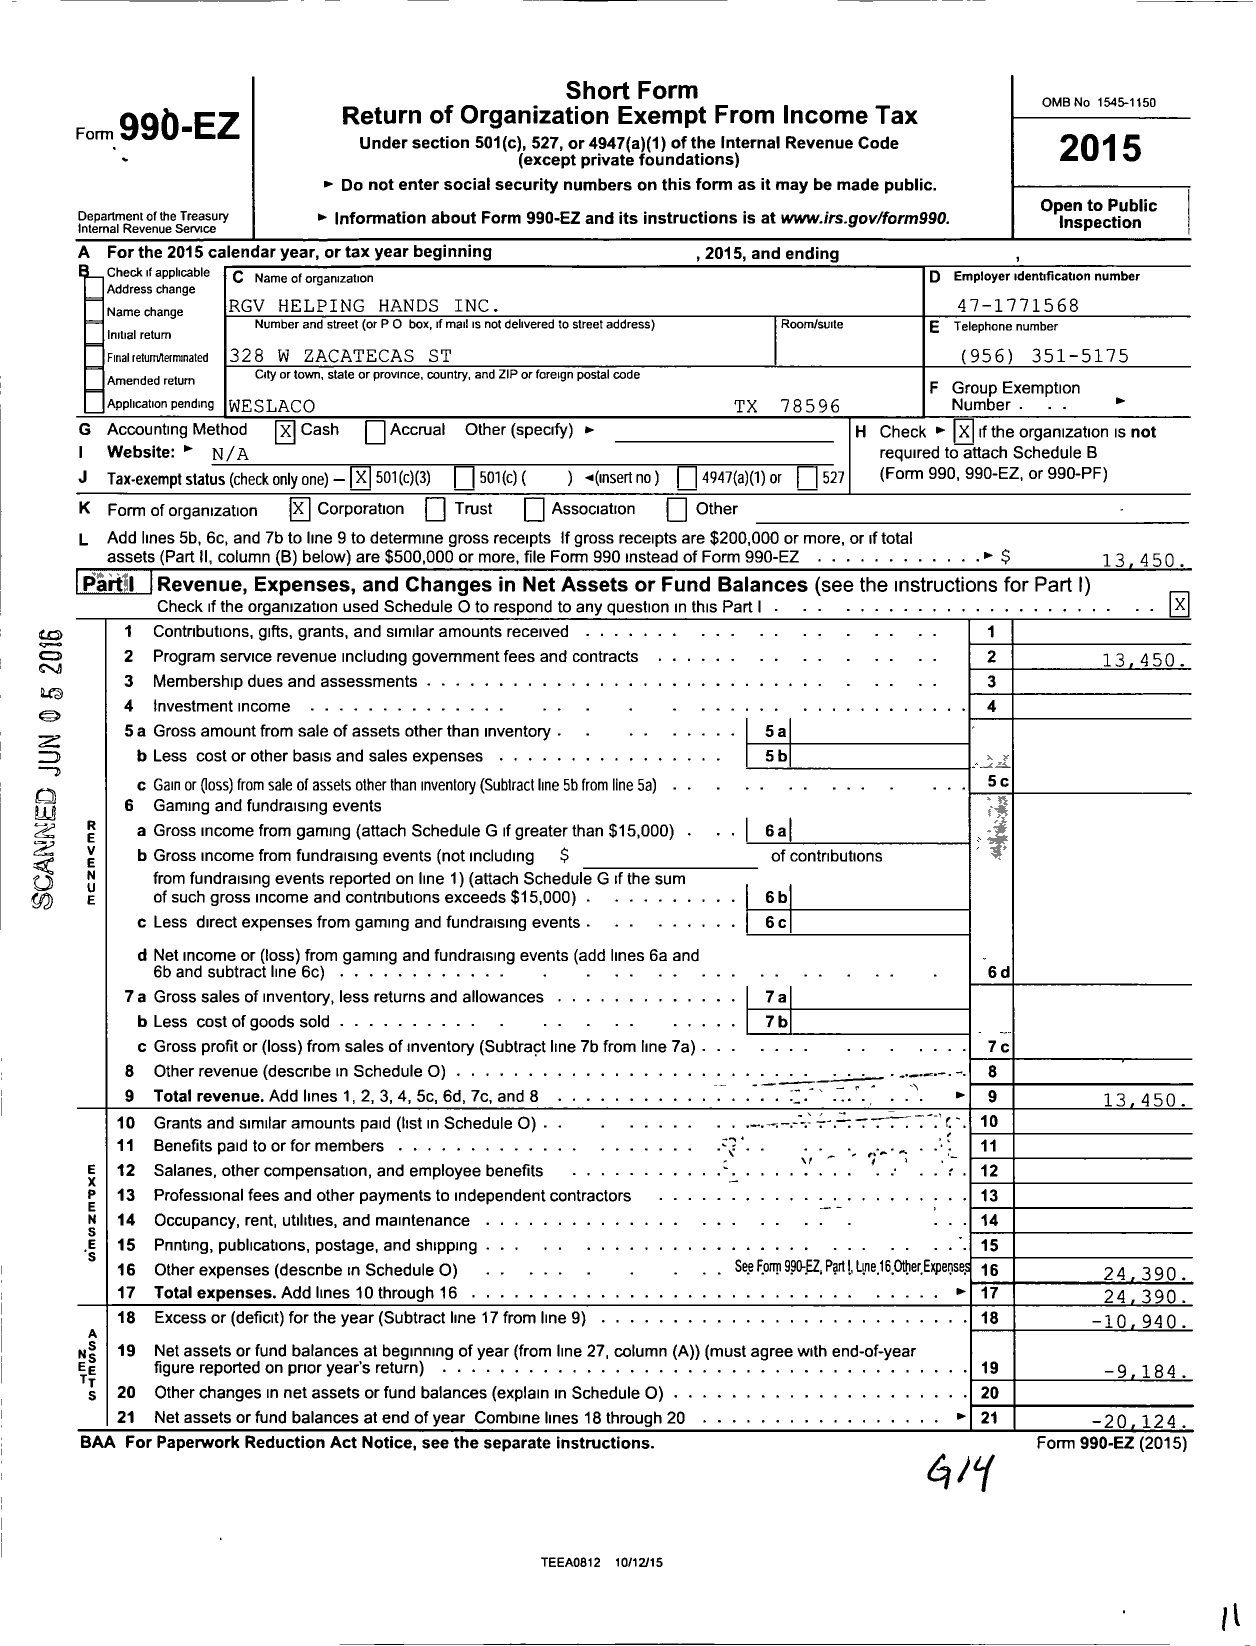 Image of first page of 2015 Form 990EZ for RGV Helping Hands